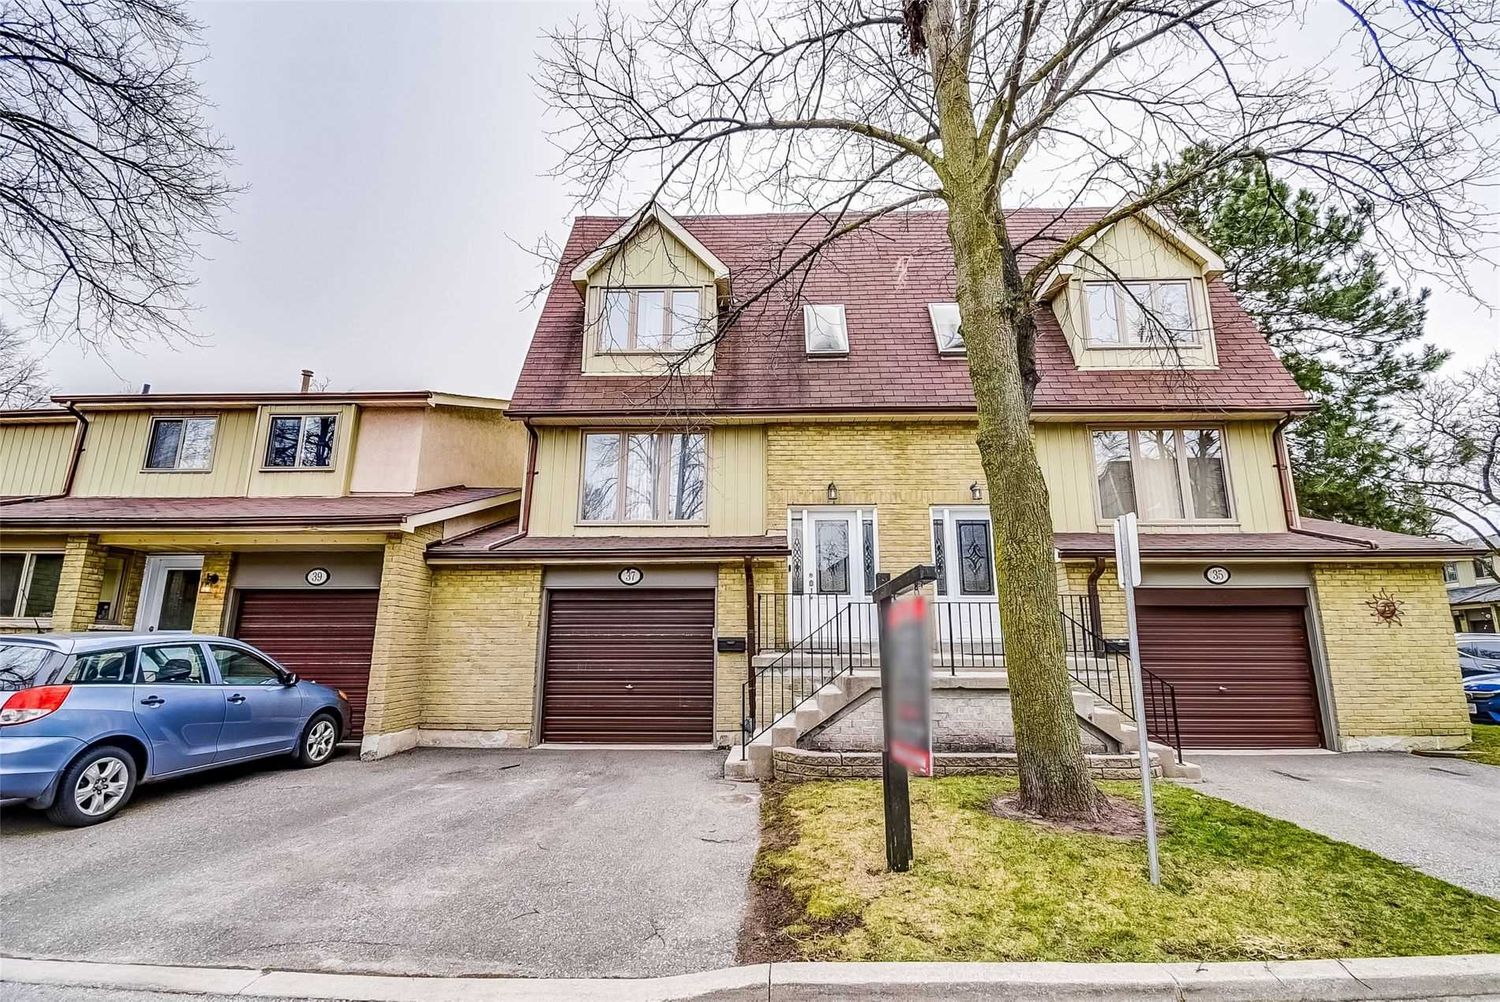 2655 Gananoque Drive. 2655 Gananoque Drive Townhomes is located in  Mississauga, Toronto - image #2 of 2